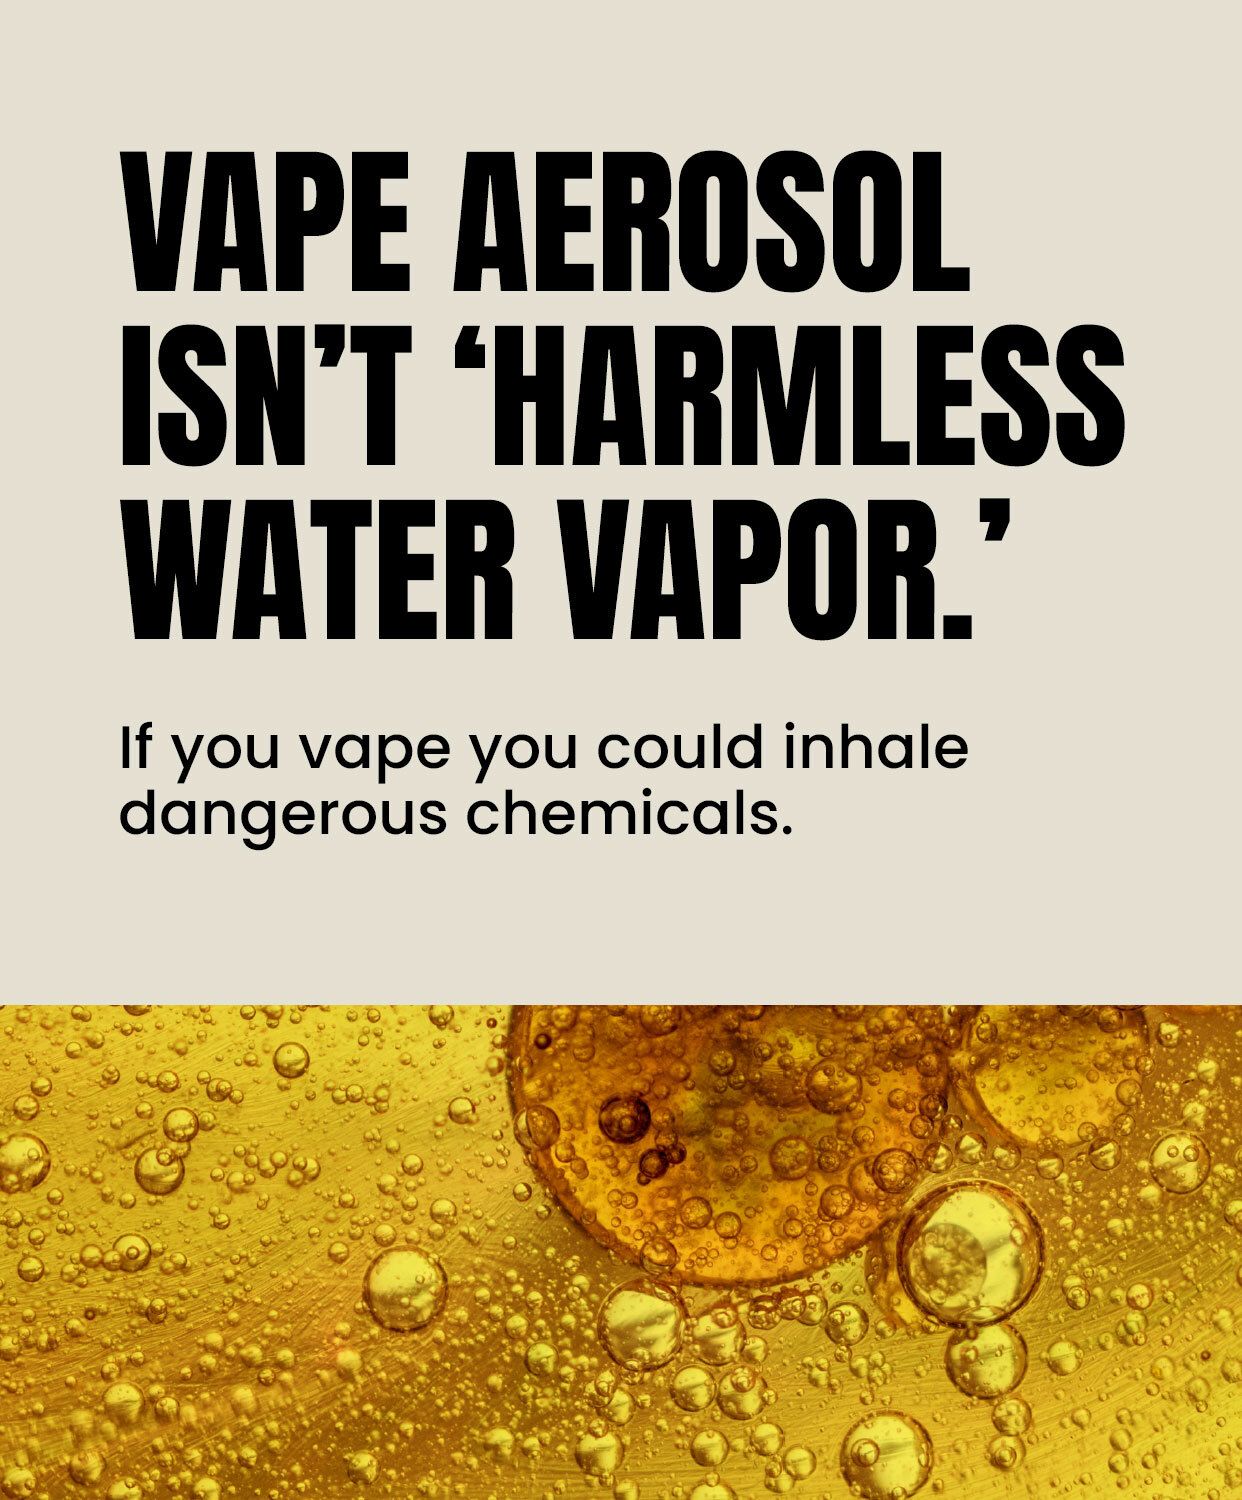 Can You Vape Water and Should You Put Water in Your Vape?